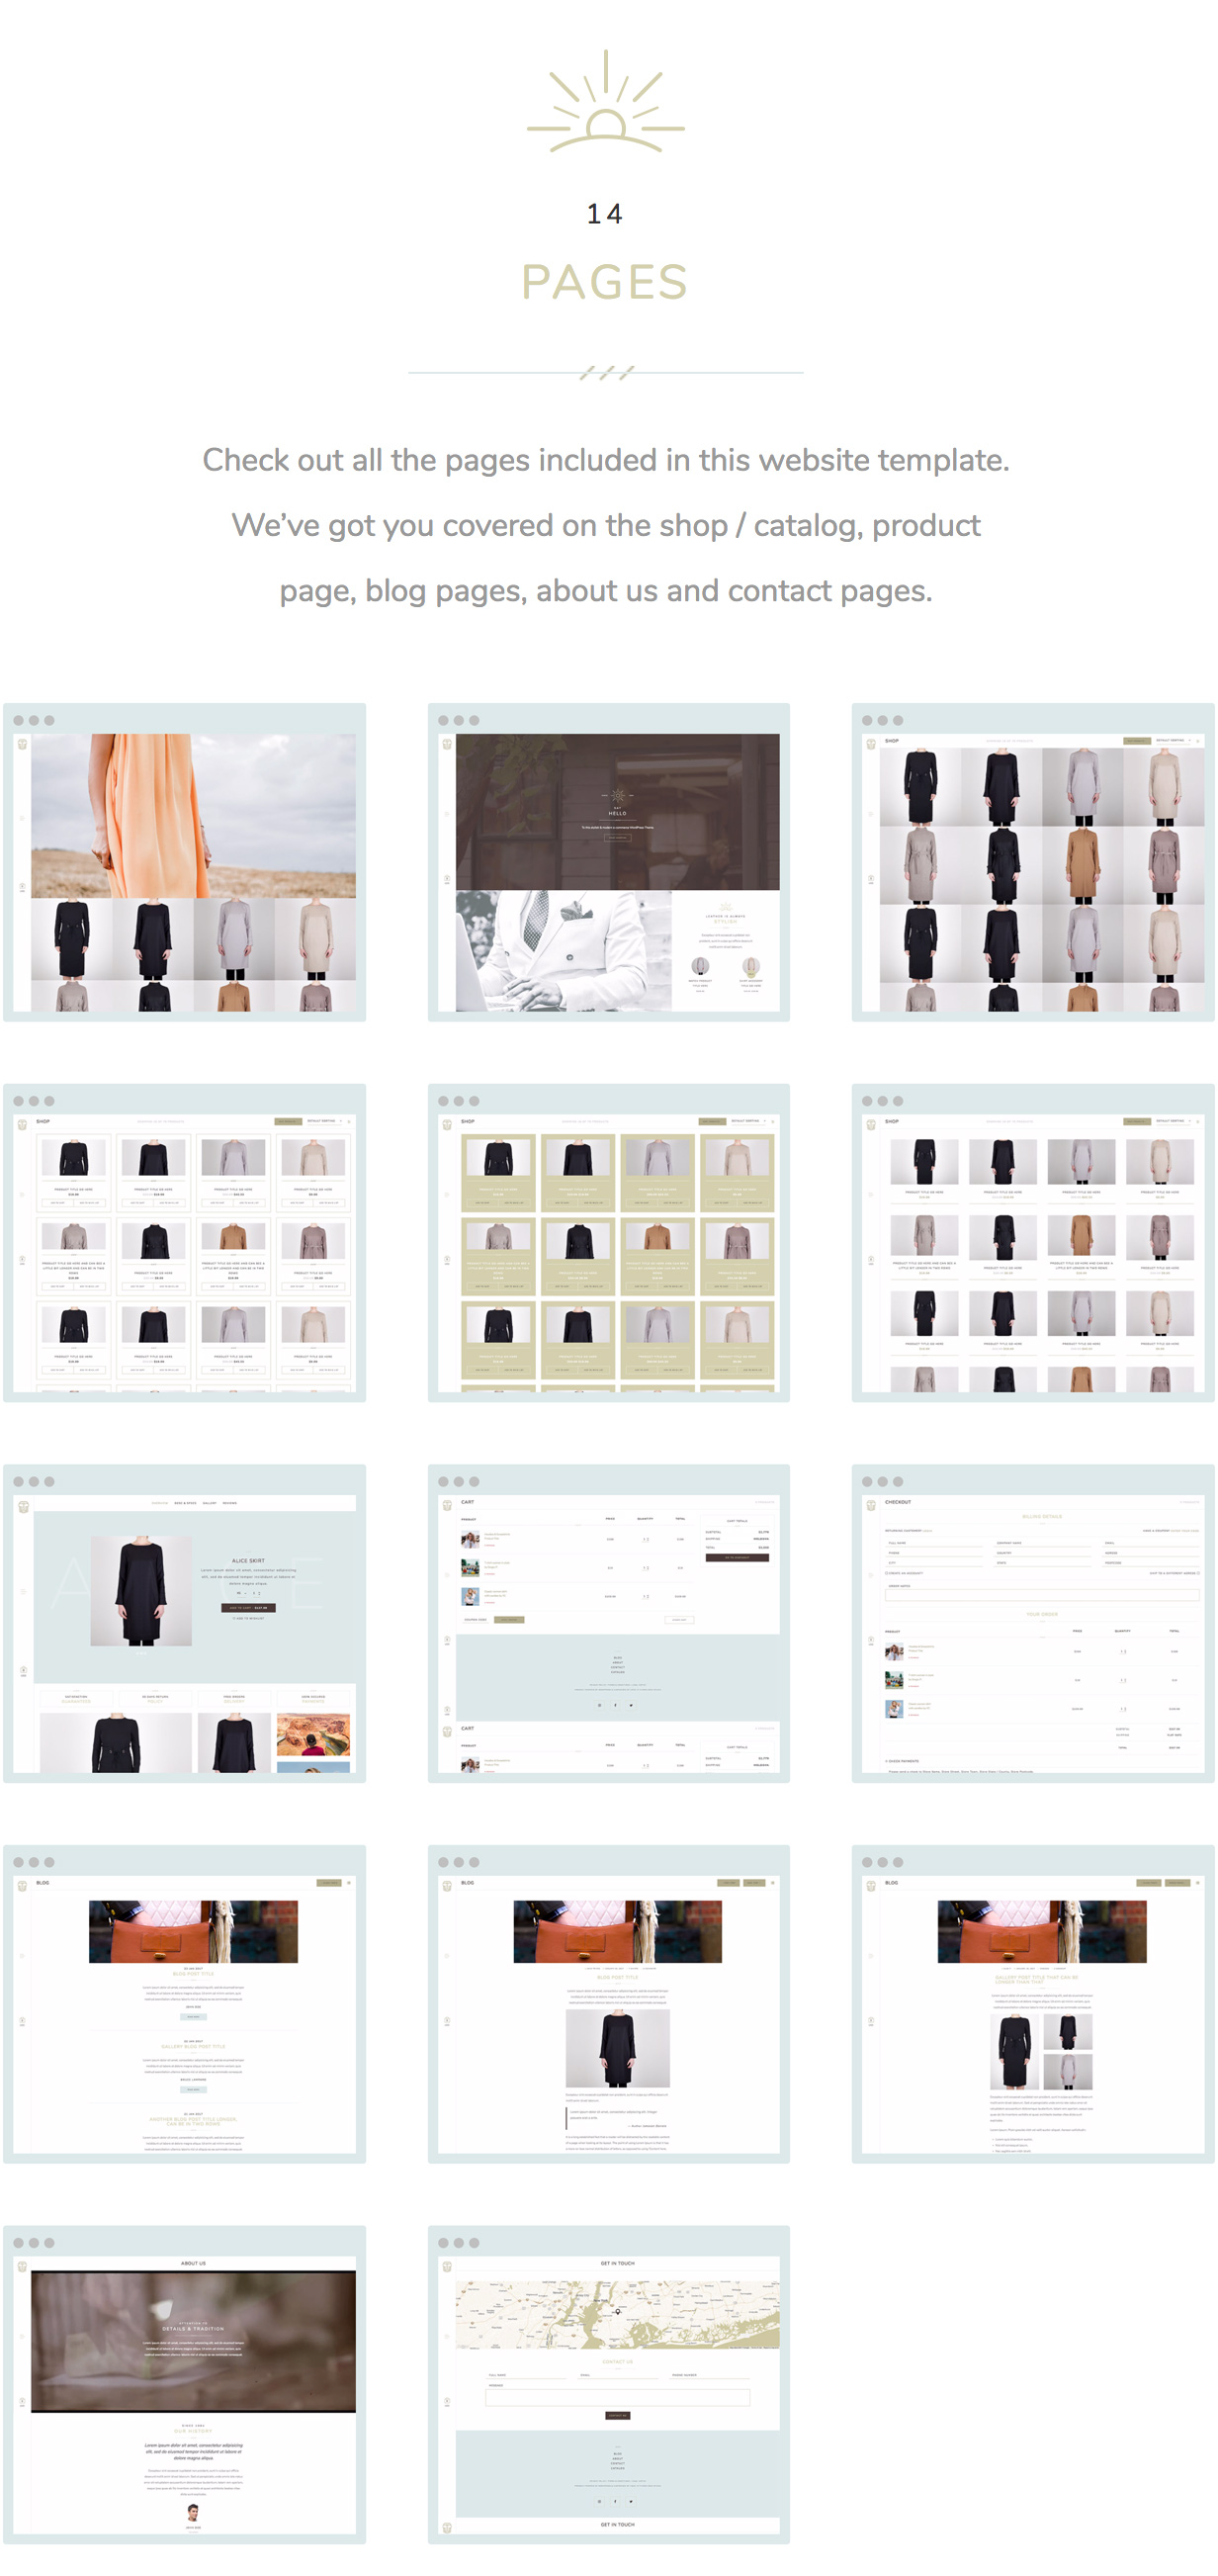 TS - Fashion & Apparel Store Website Template - 2